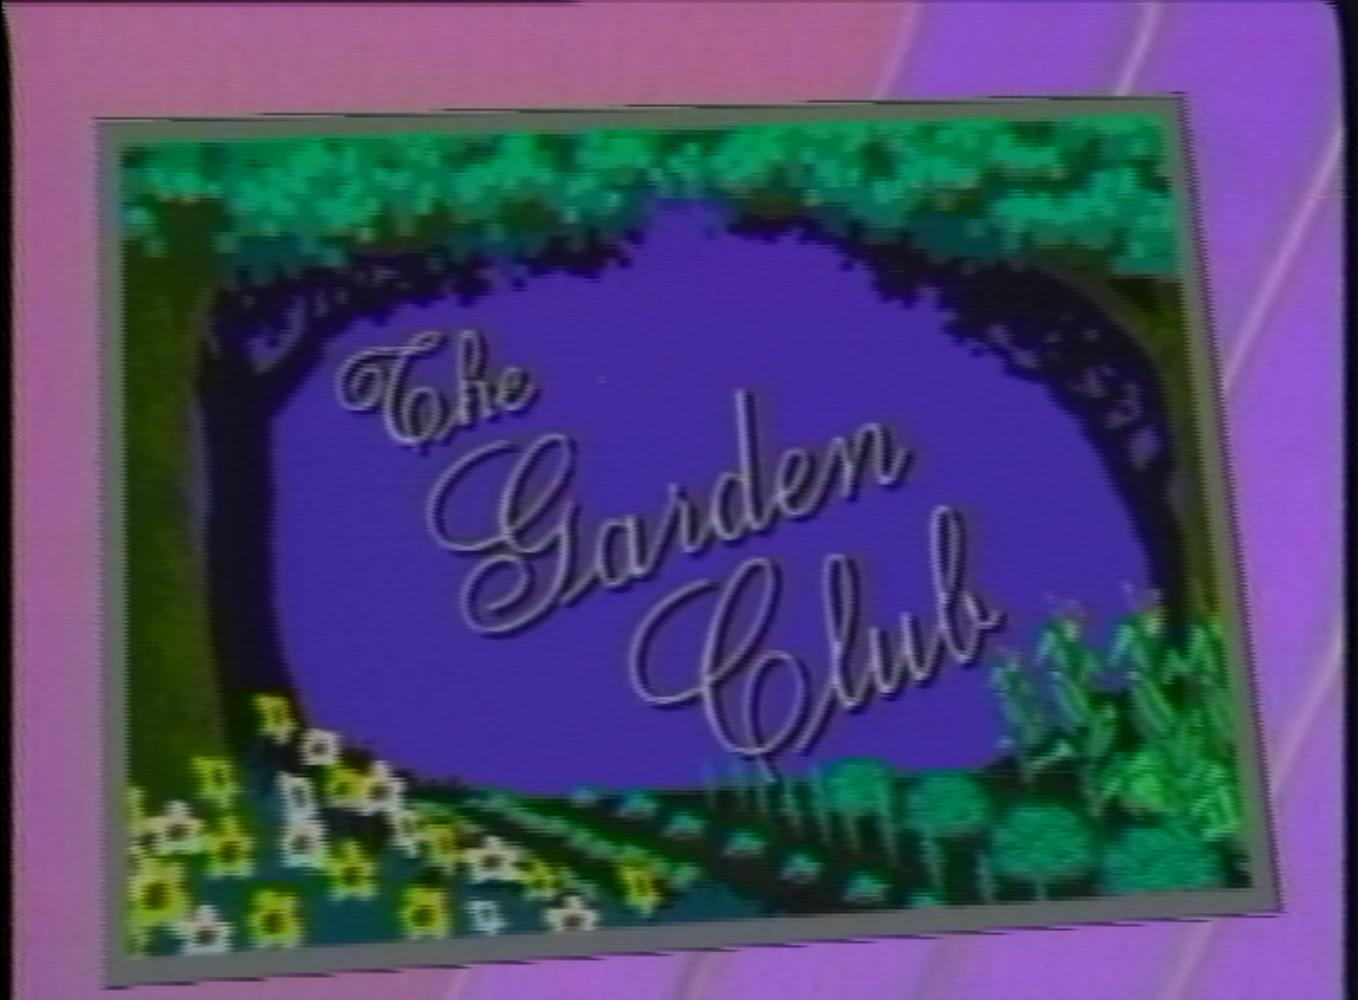 A screen grab of the opening animation for The Garden Club, a regular WSJV program featuring gardening advice with Mike Maloney. September 19, 1990.